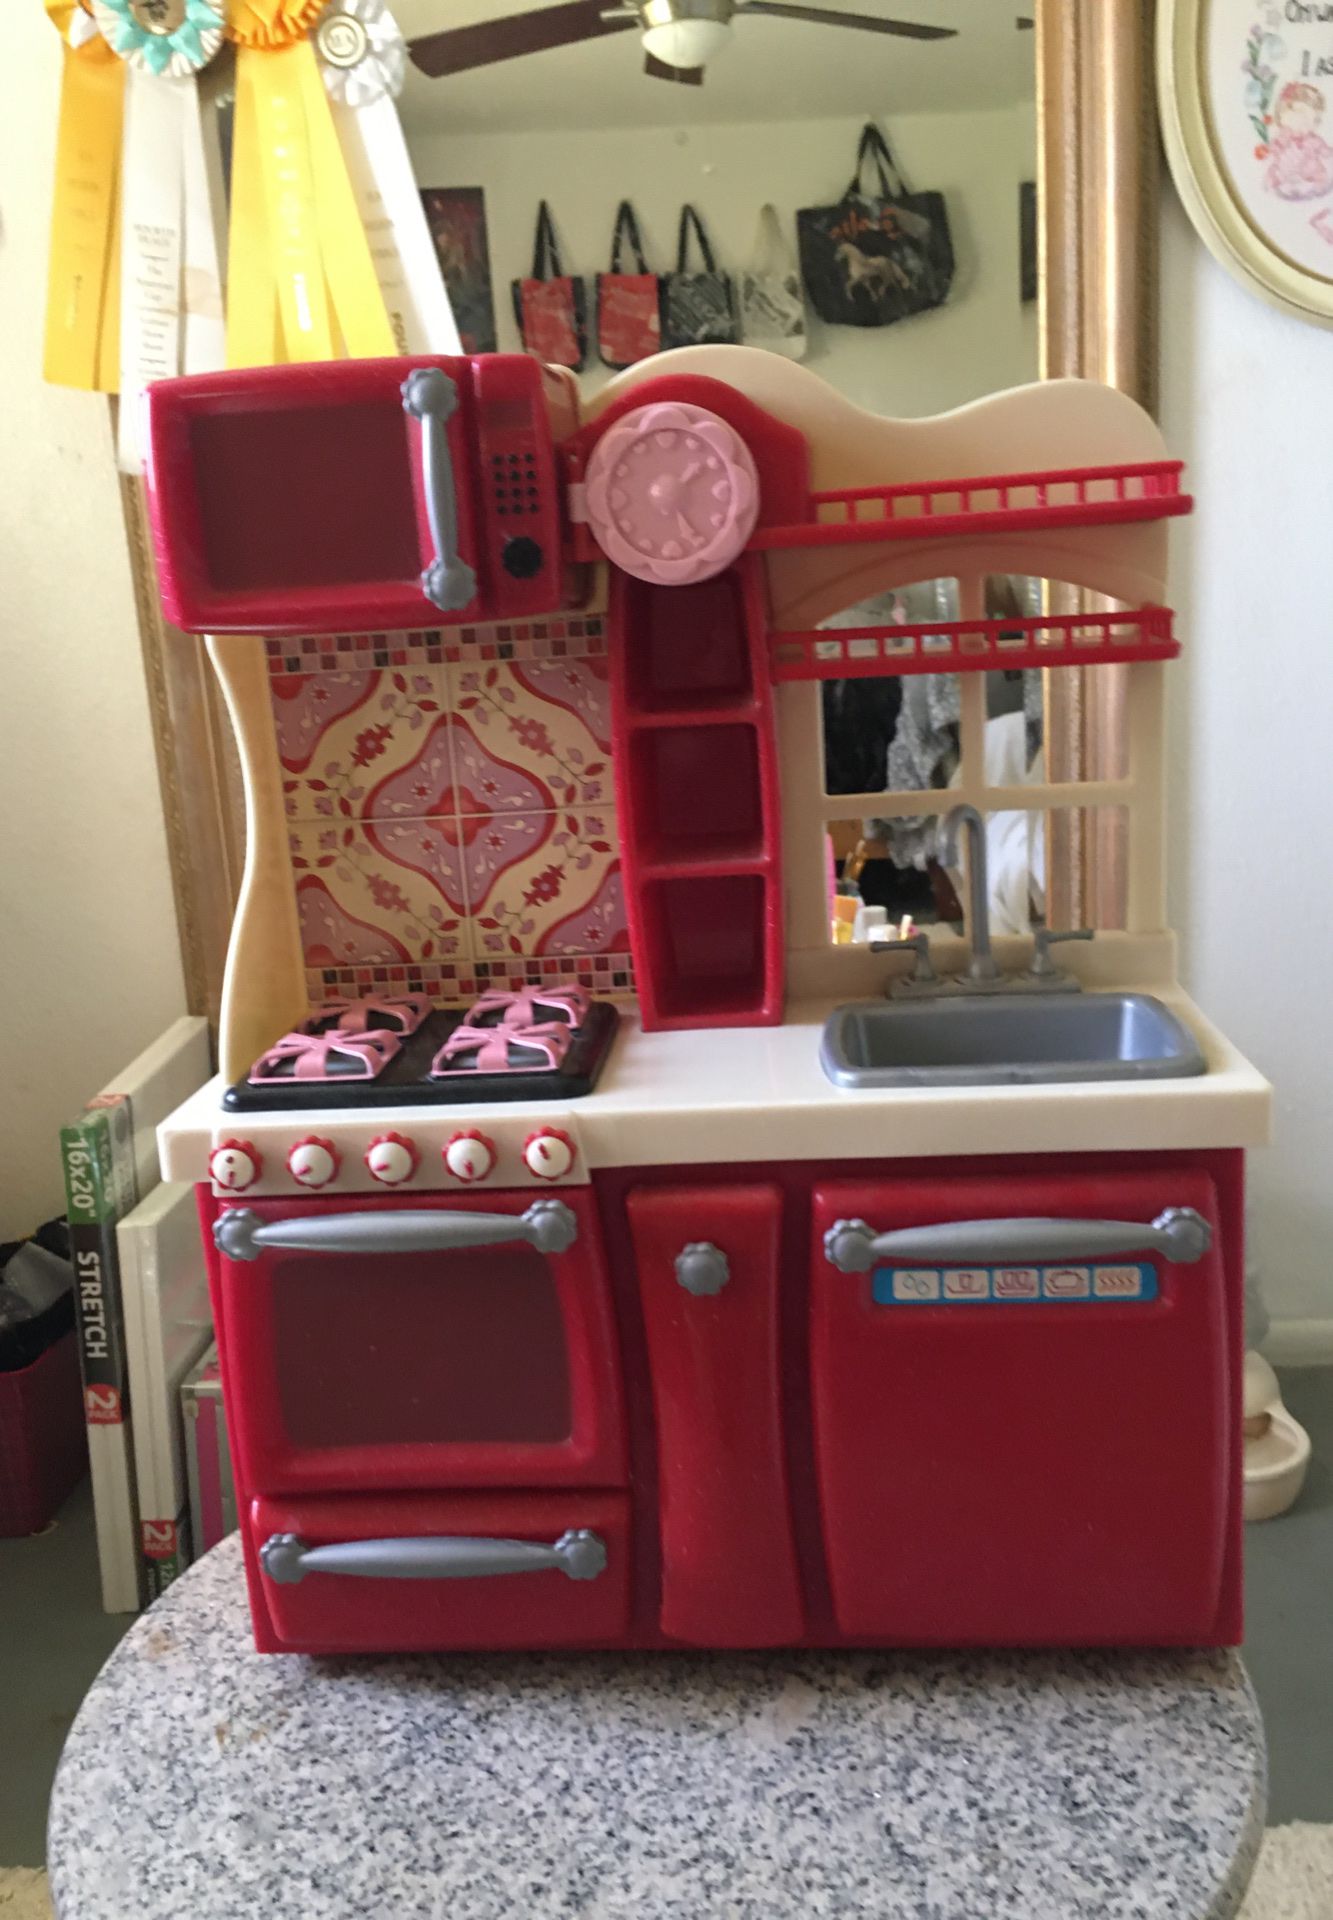 American girl doll kitchen if you want to make an offer I am open